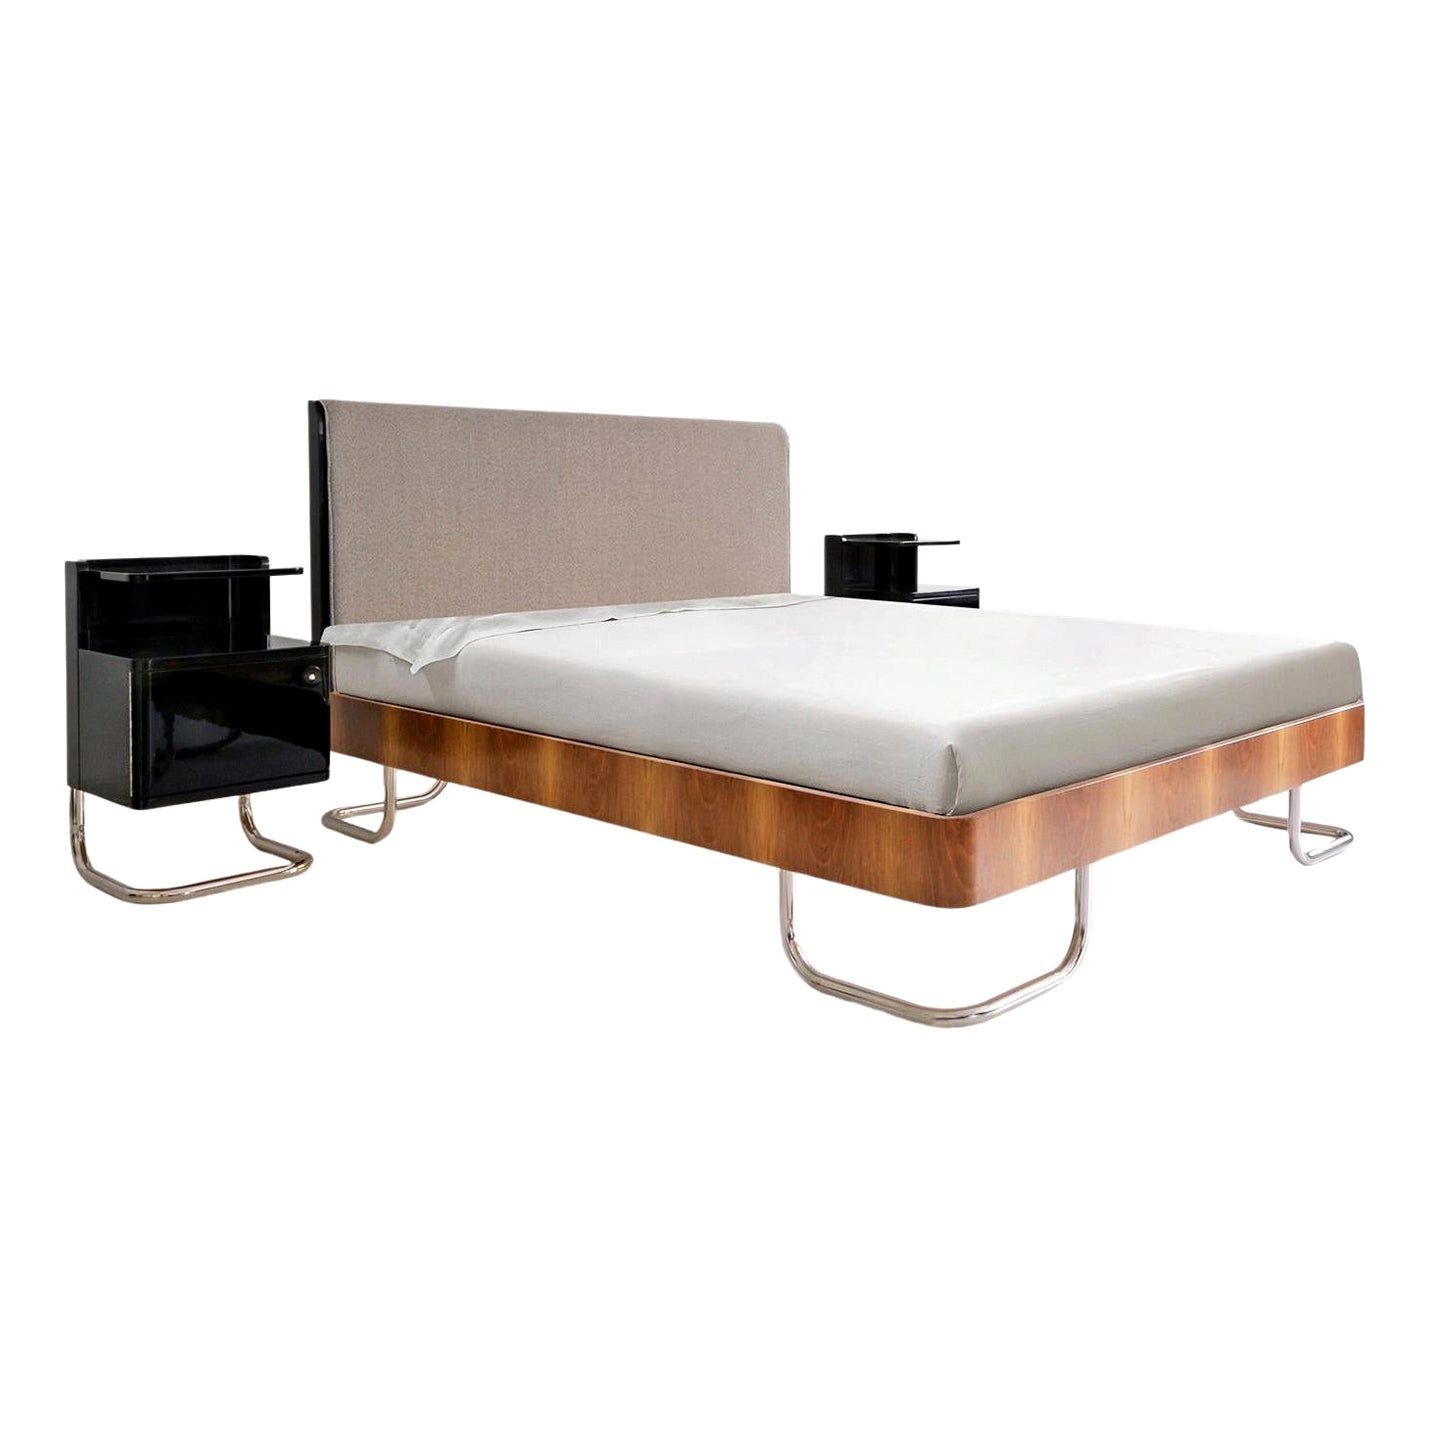 Bespoke Modern Contemporary Double Bed with Bedside Cabinets in Handcrafted Wood For Sale